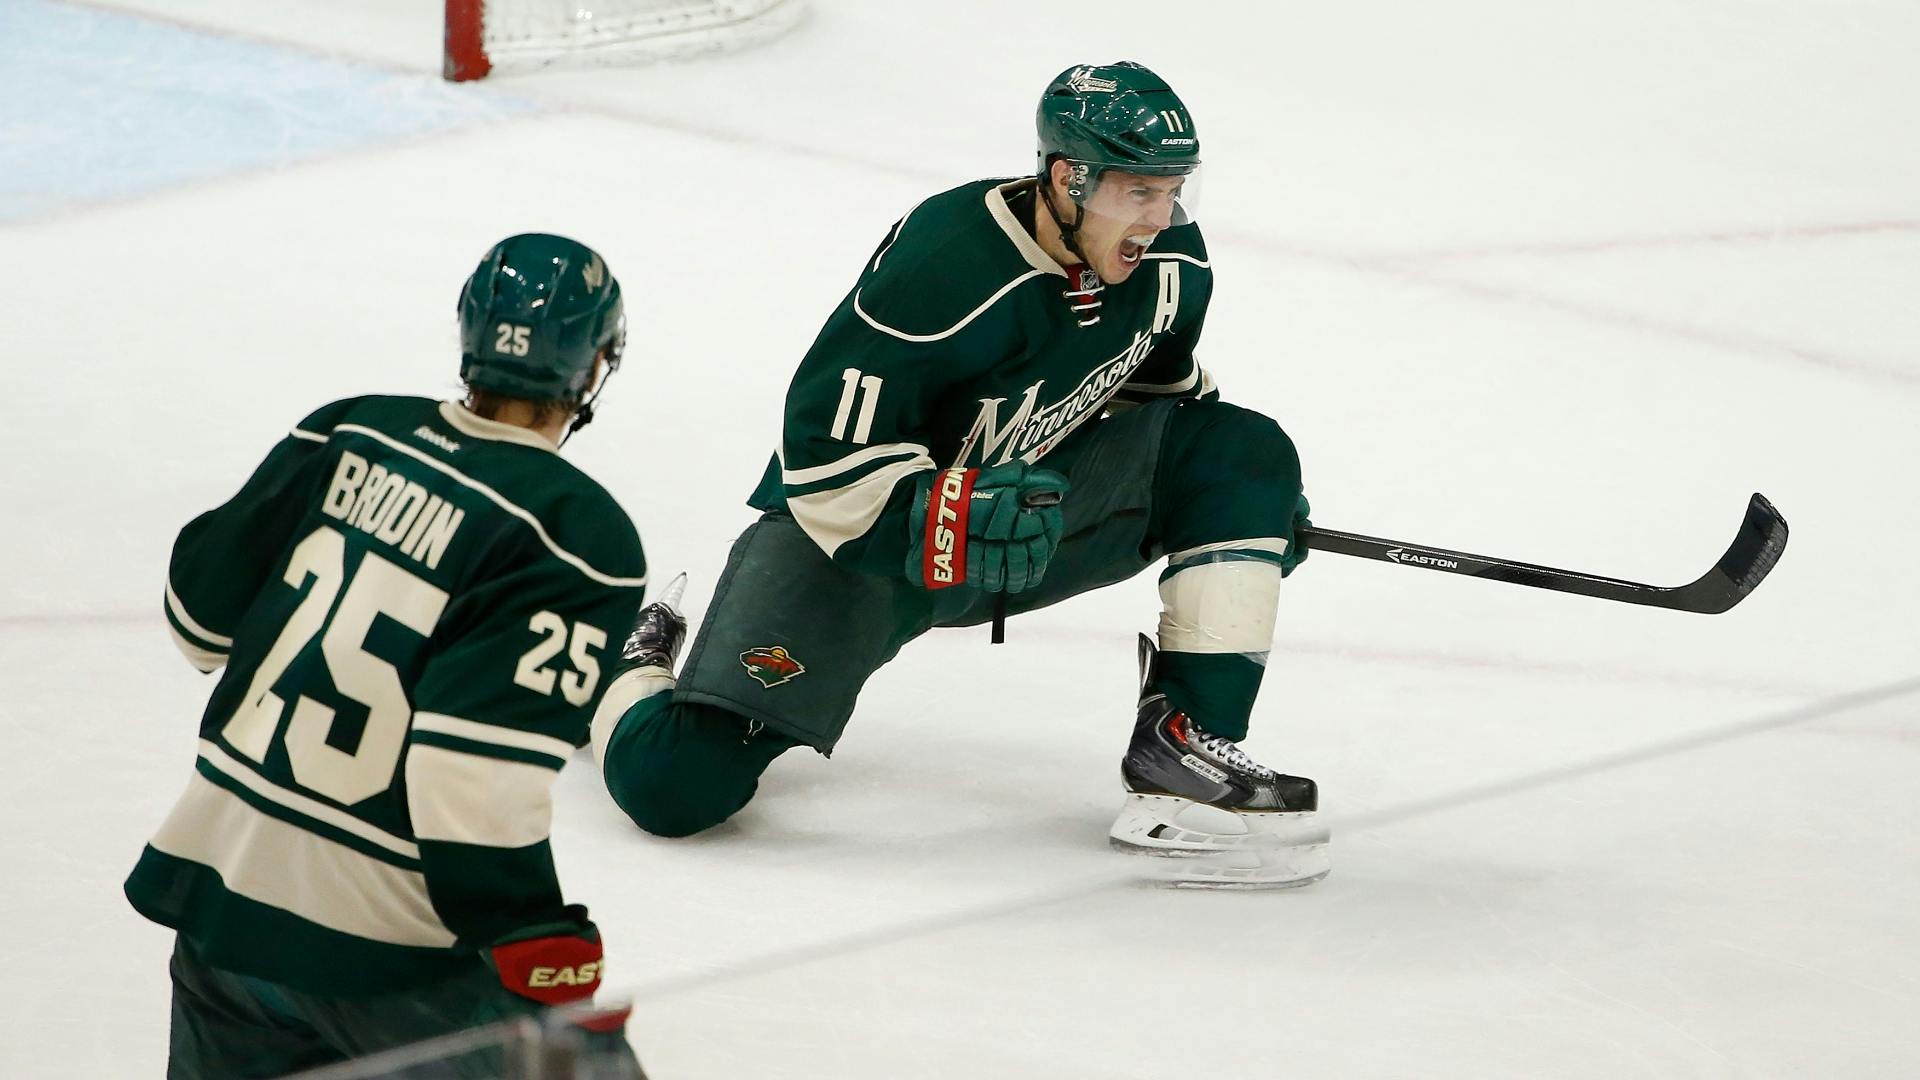 The Wild won a clutch Game 6 victory at home, losing an early lead but rally to send the series to a final game on Wednesday.